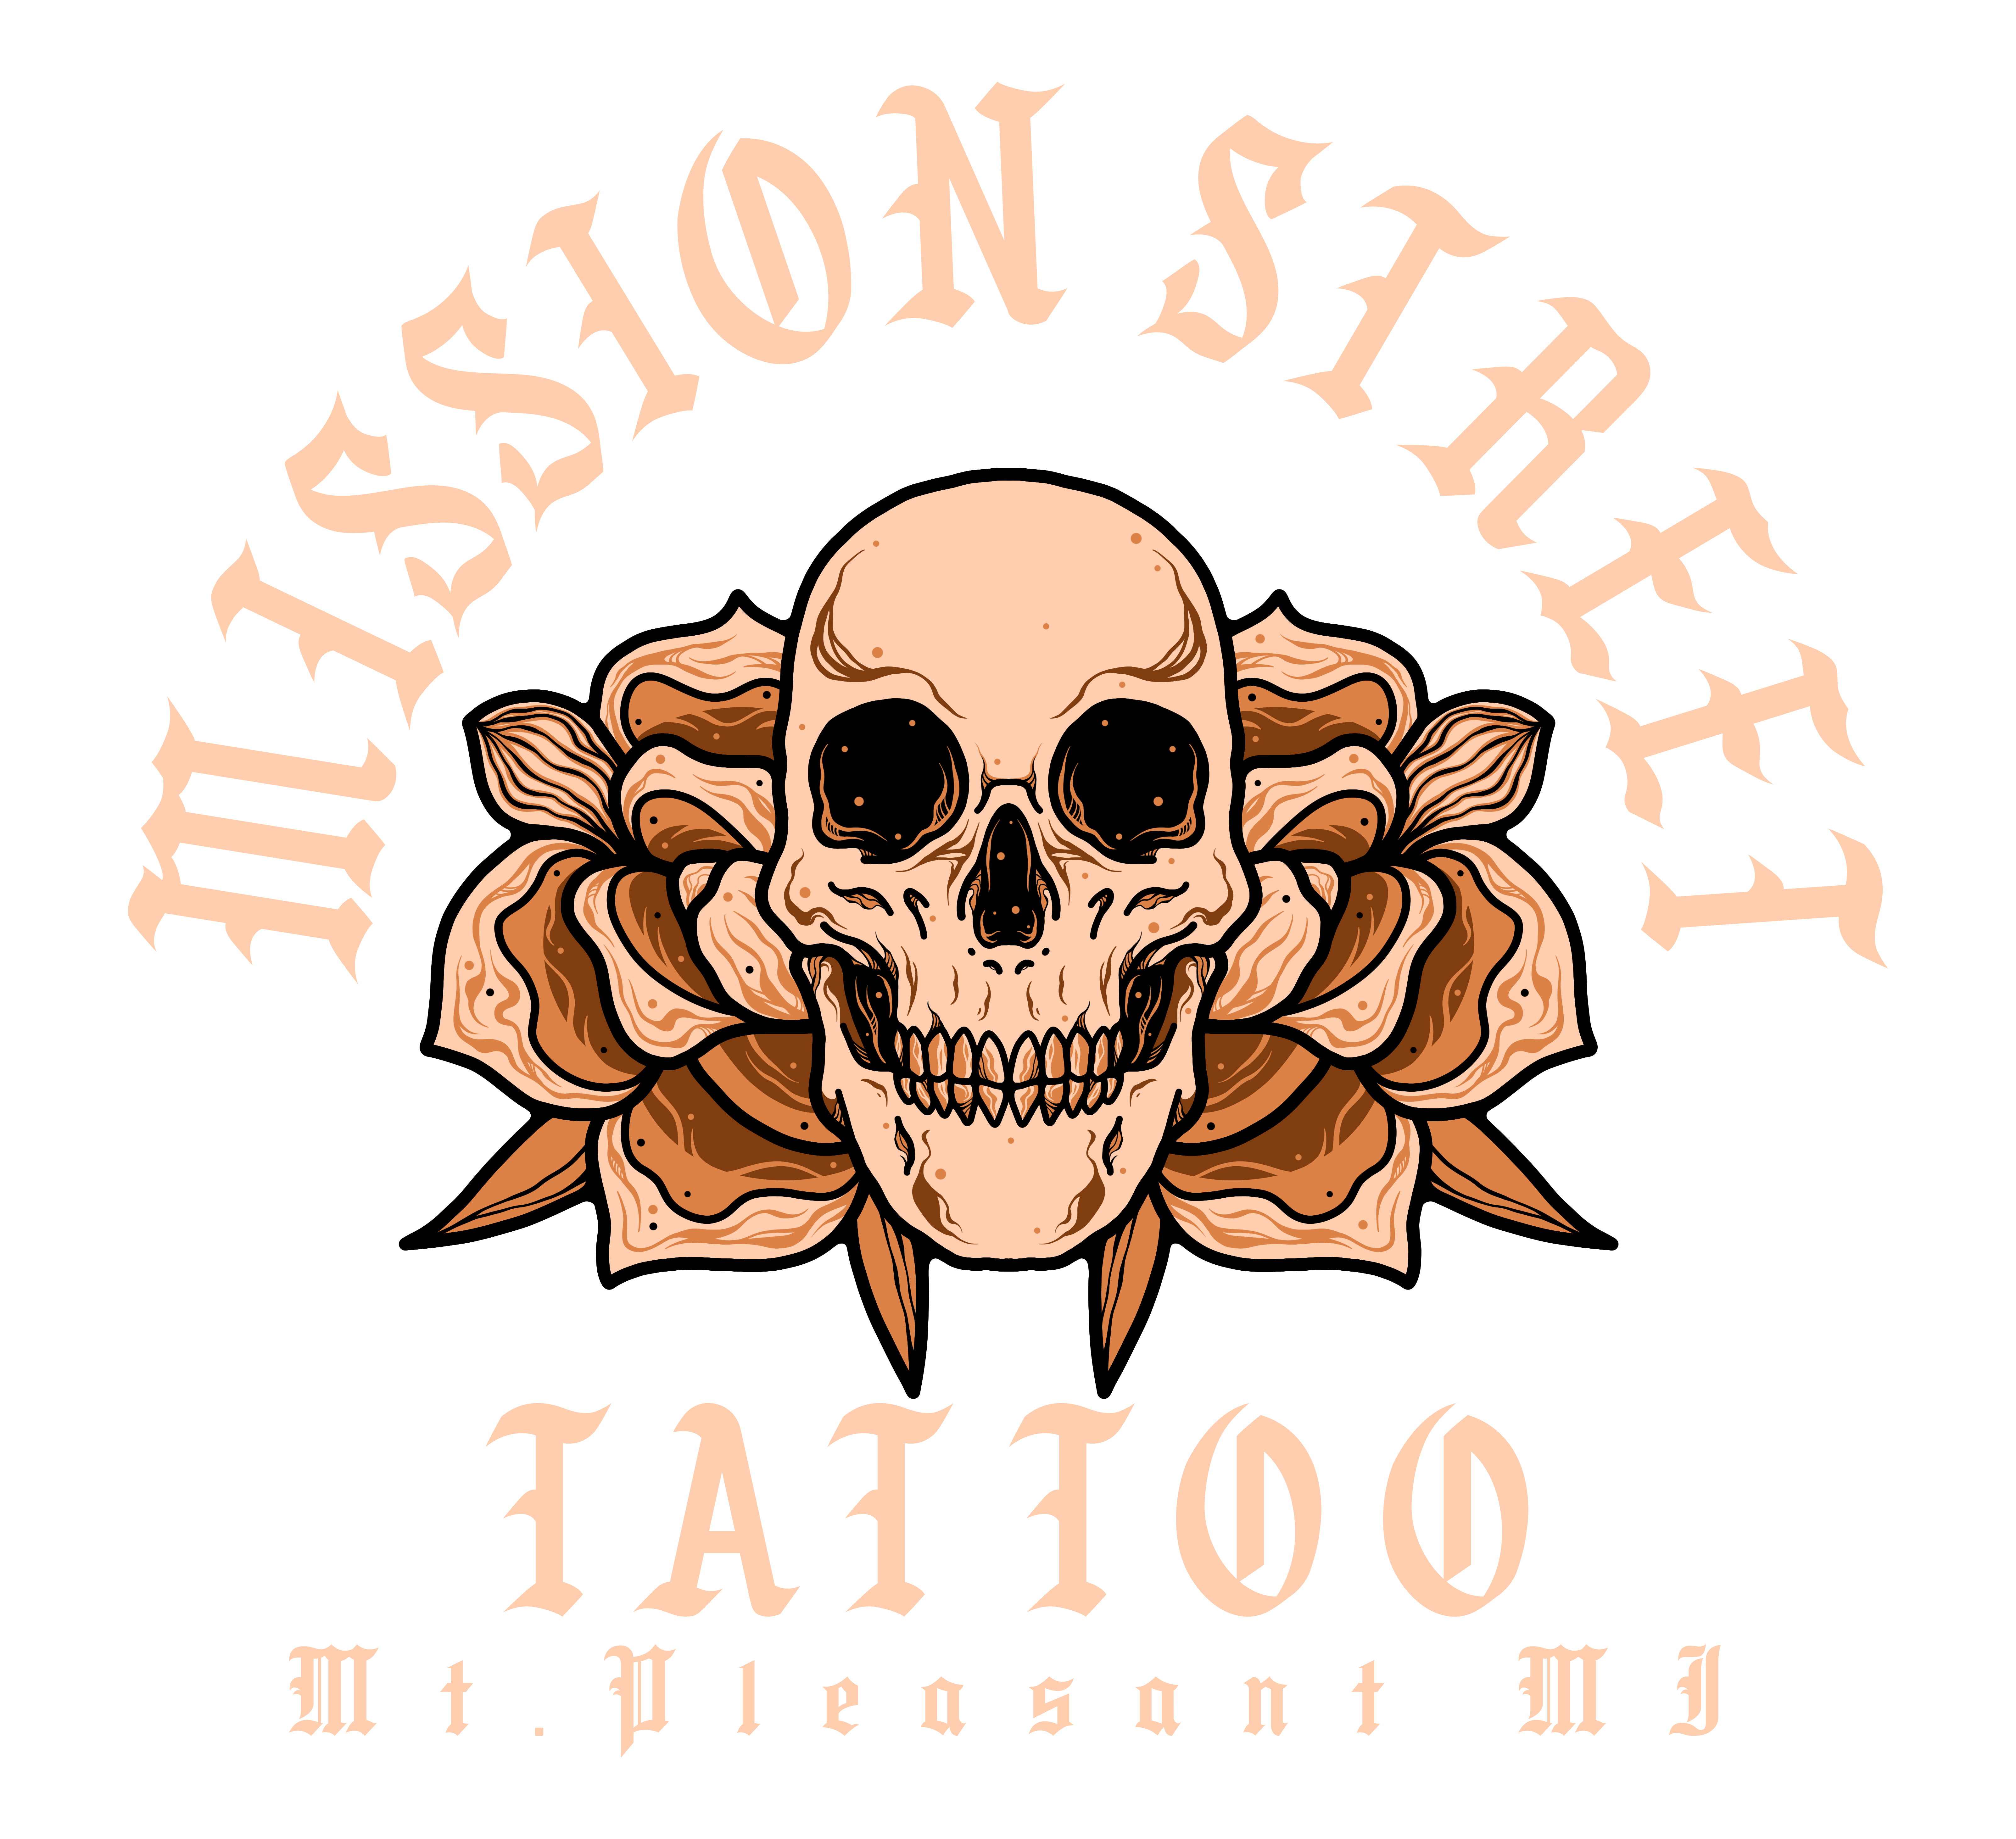 Sinister Productions Tattoo 1807 South Mission Street Mount Pleasant  Reviews and Appointments  GetInked